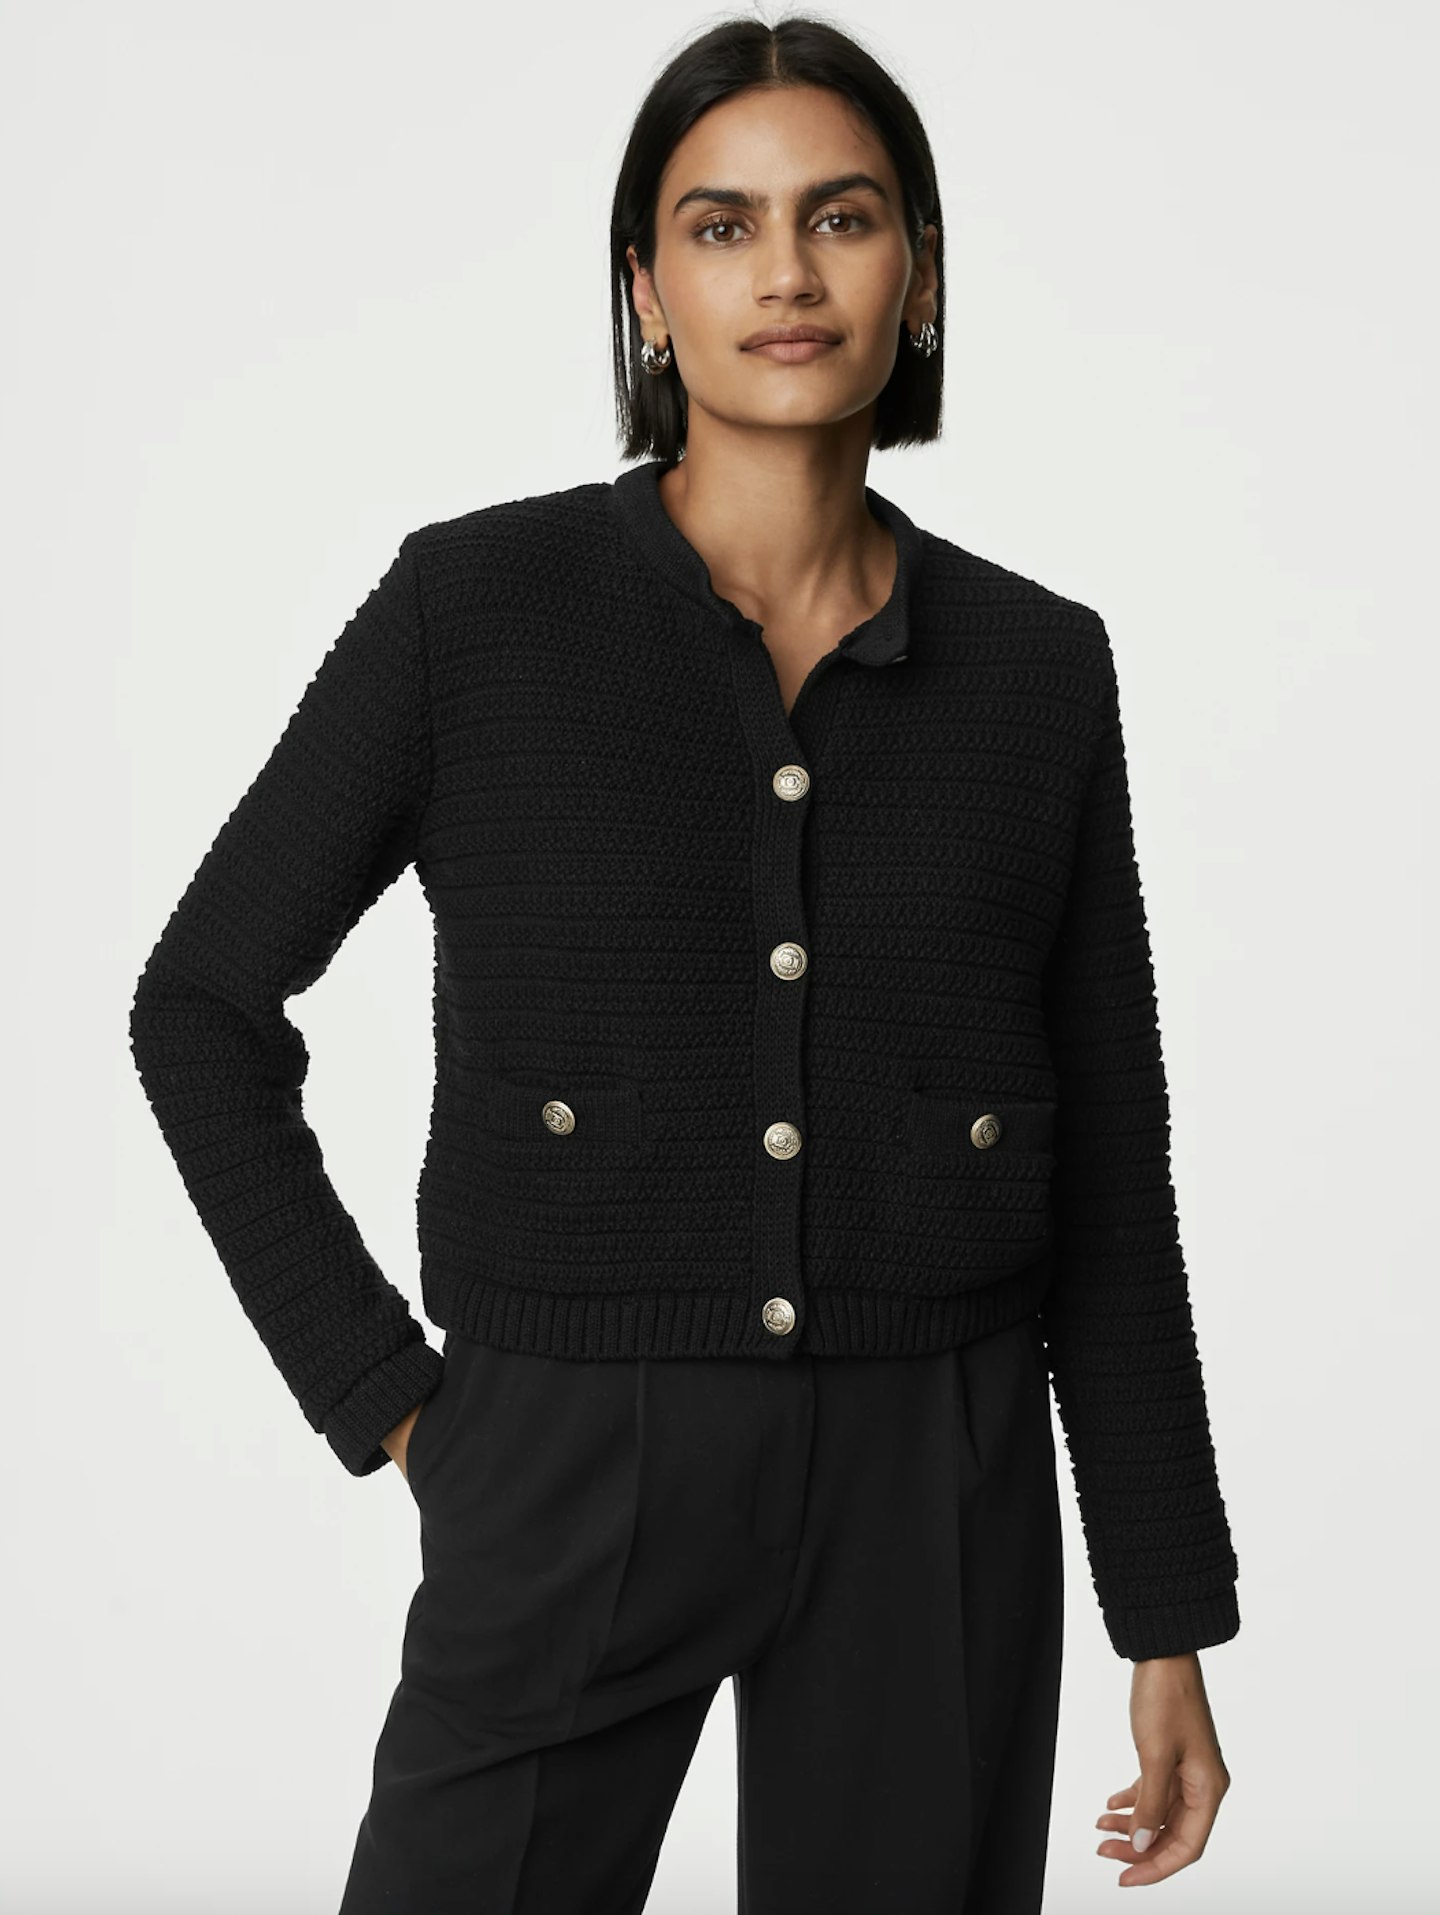 M&S Cotton Blend Textured Knitted Jacket